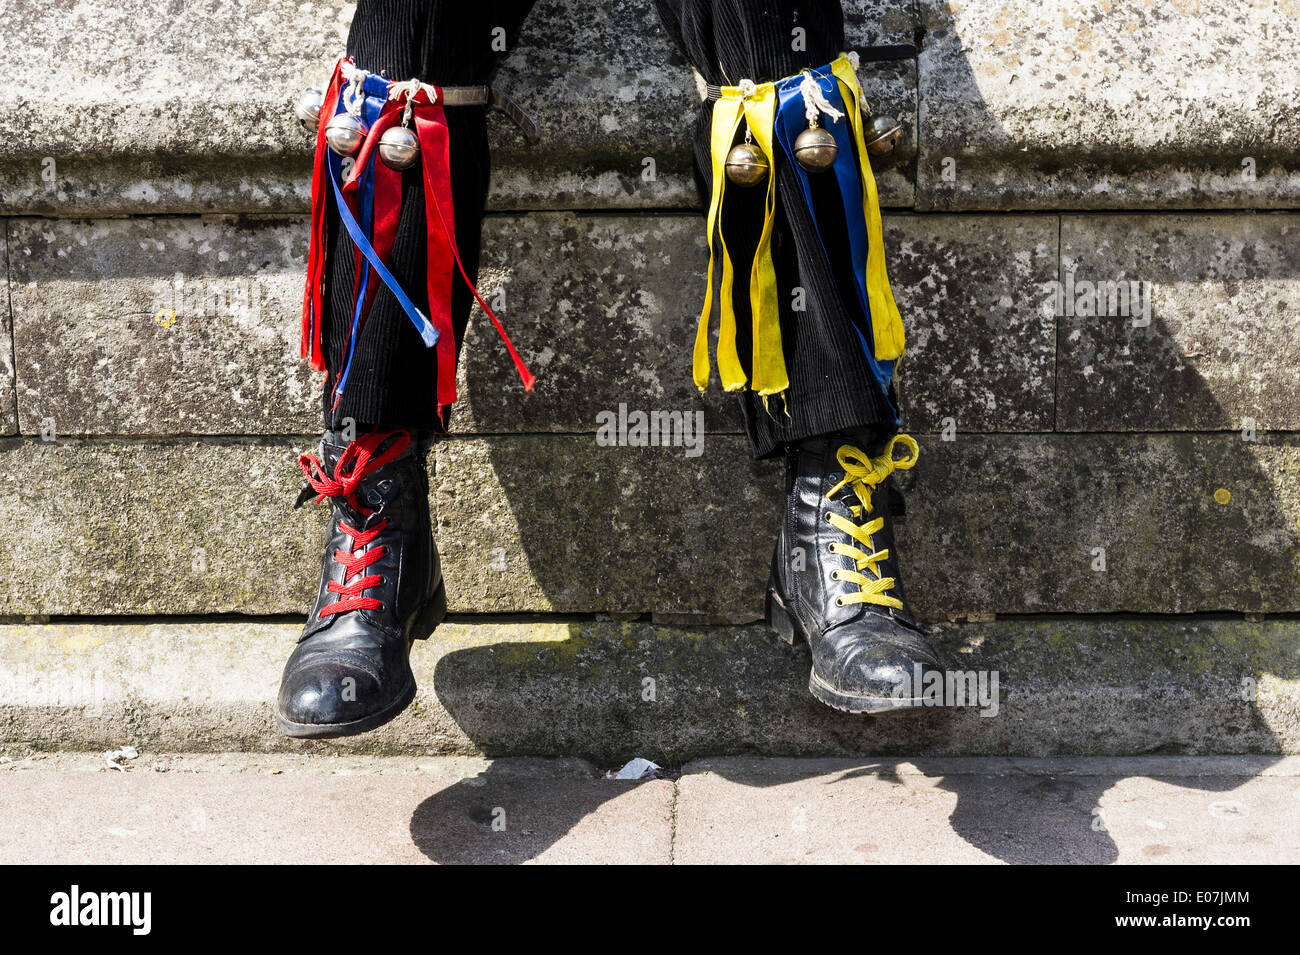 Rochester, Kent, UK. 5th May, 2014. The traditional leg decorations and bells worn by Morris dancers at the Sweeps Festival in Rochester, Kent, UK.    Photographer:  Gordon Scammell/Alamy Live News Stock Photo